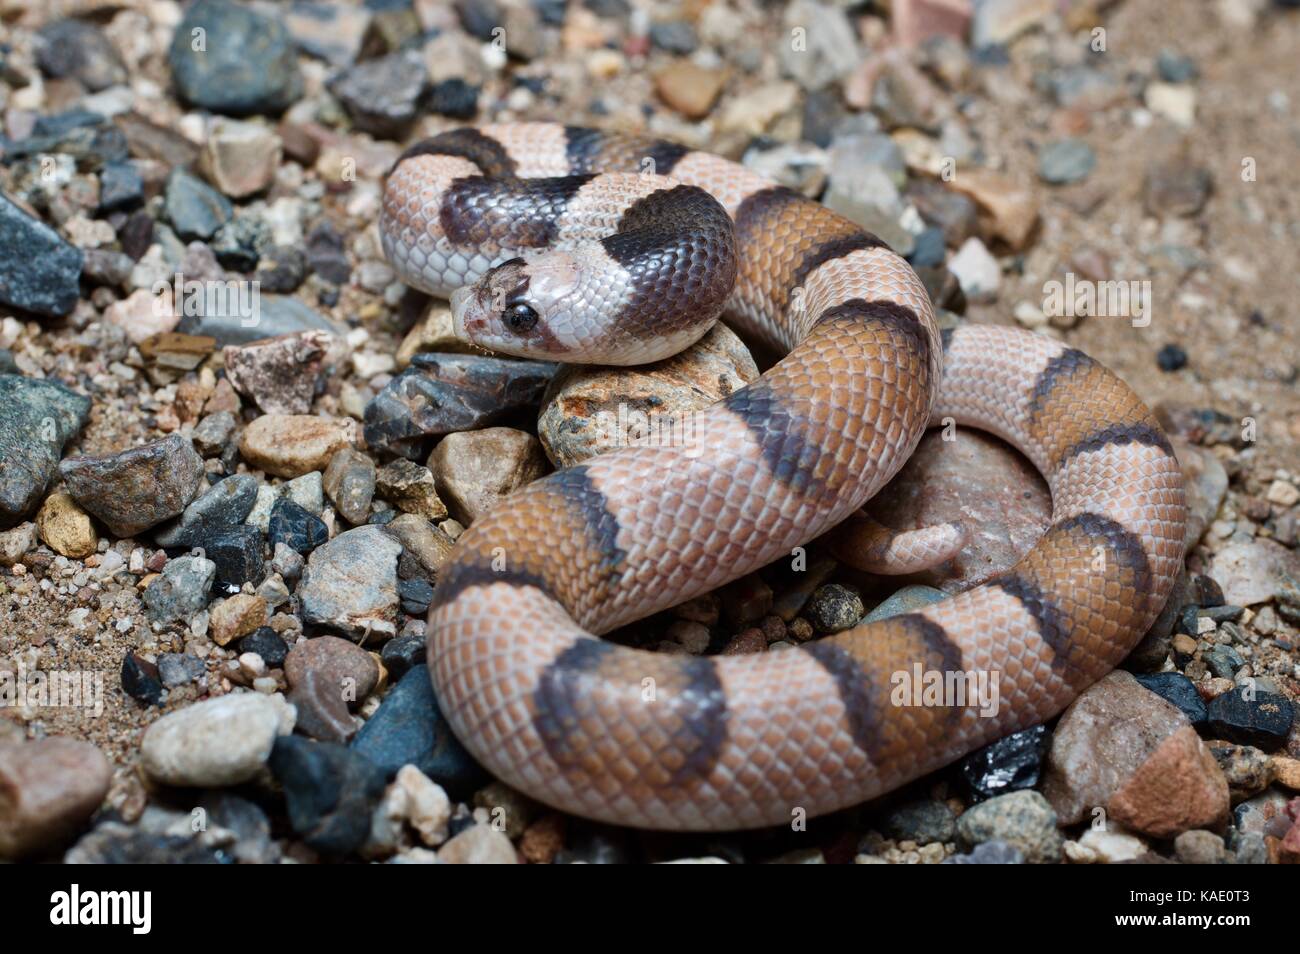 A Saddled Leaf-nosed Snake (Phyllorhynchus browni) on the desert floor near Alamos, Sonora, Mexico Stock Photo